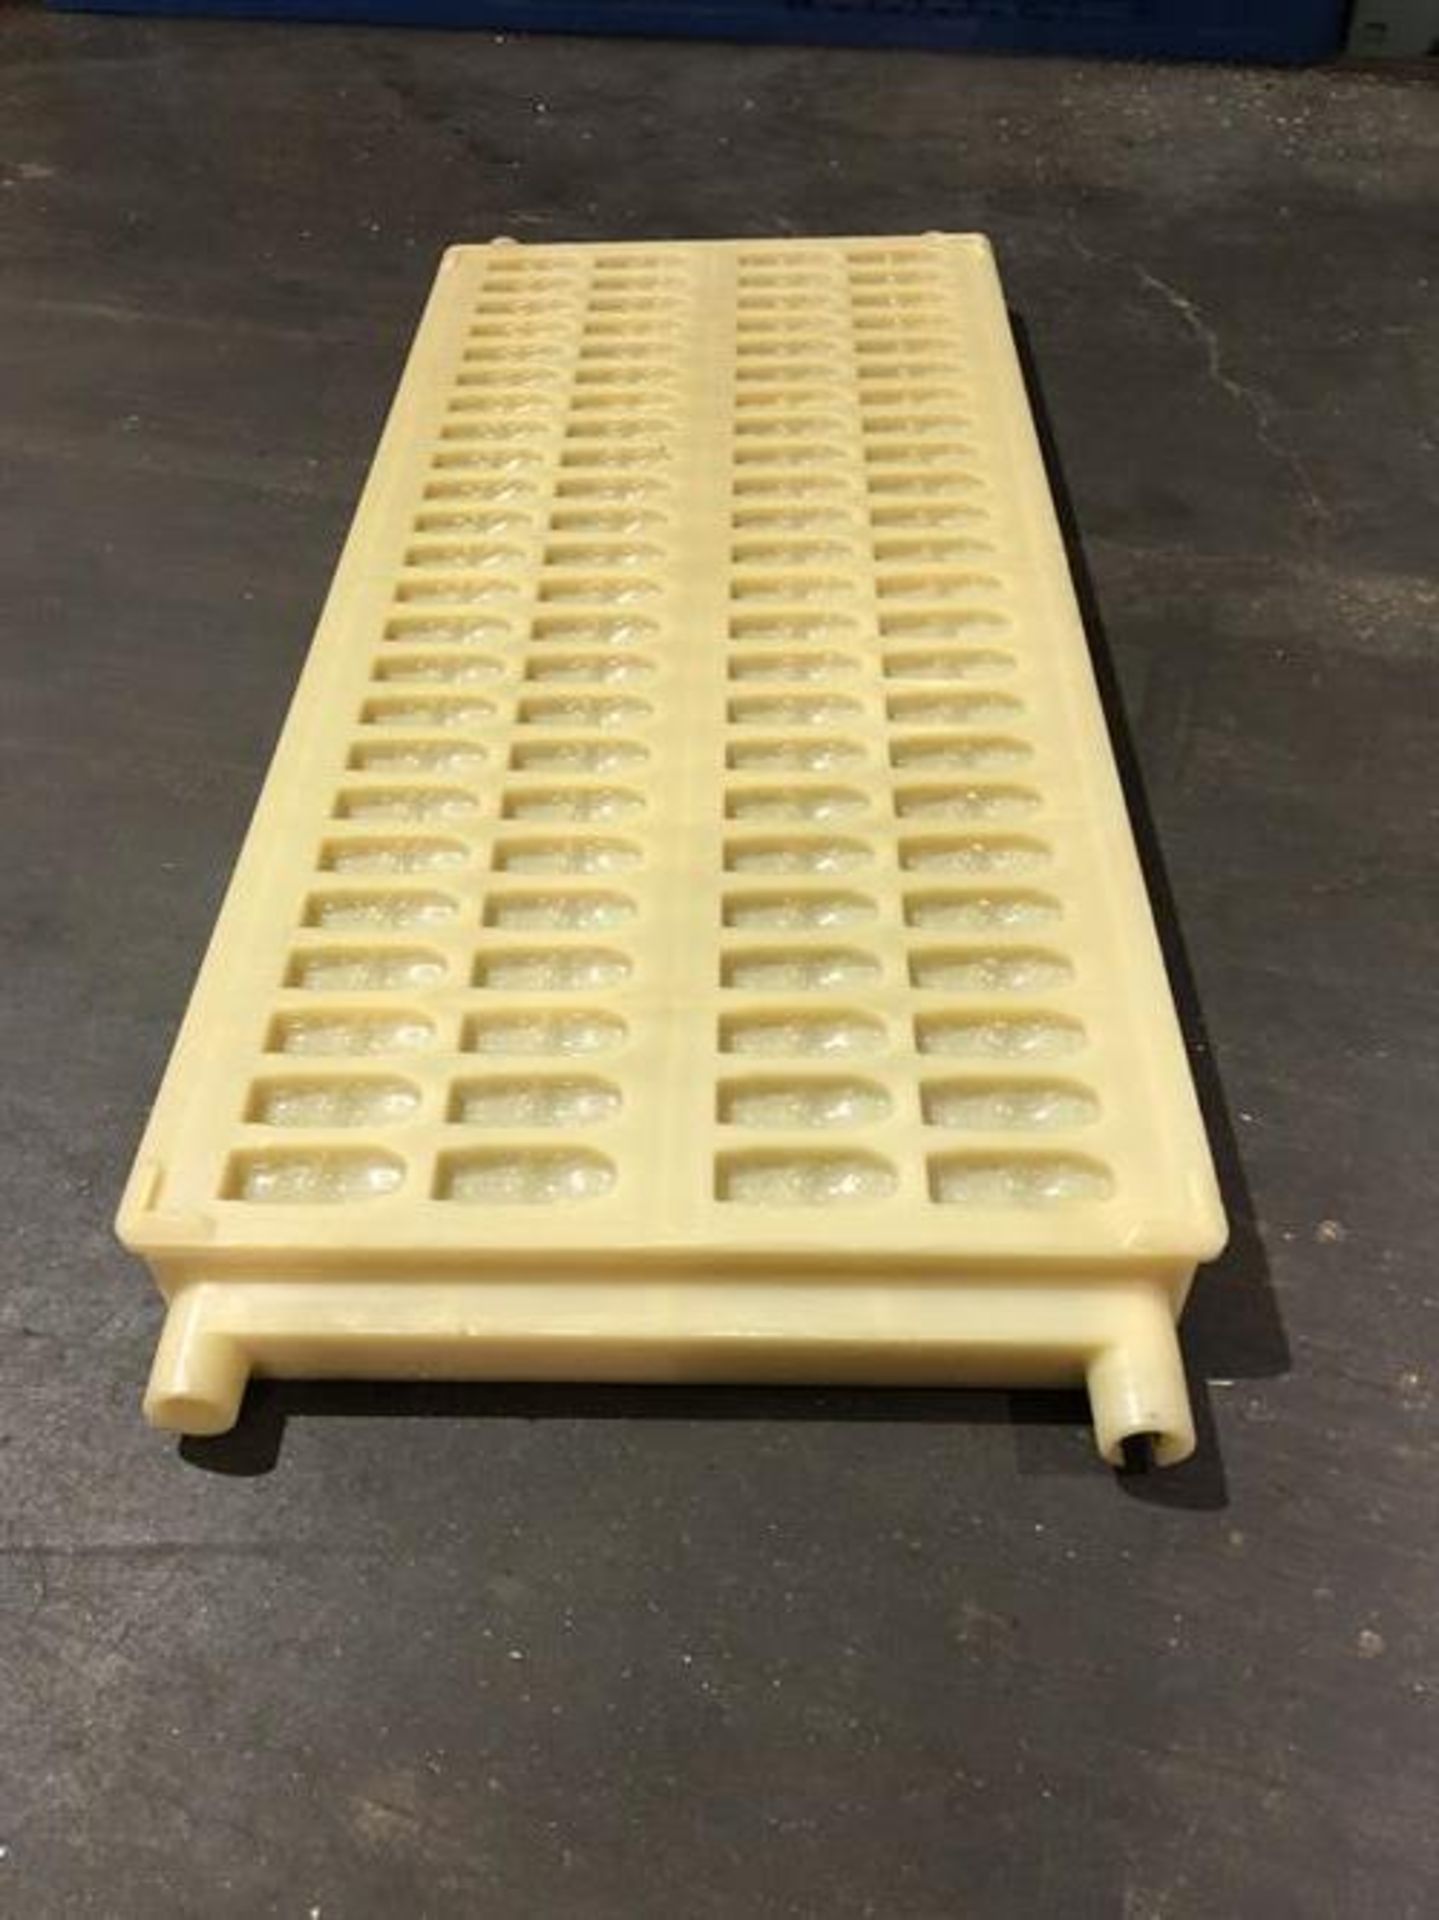 Mikrovaerk Chocolate Molding Plant – Solid Bars with Inclusions - 670 x 305 molds (about 14 mold - Image 63 of 81